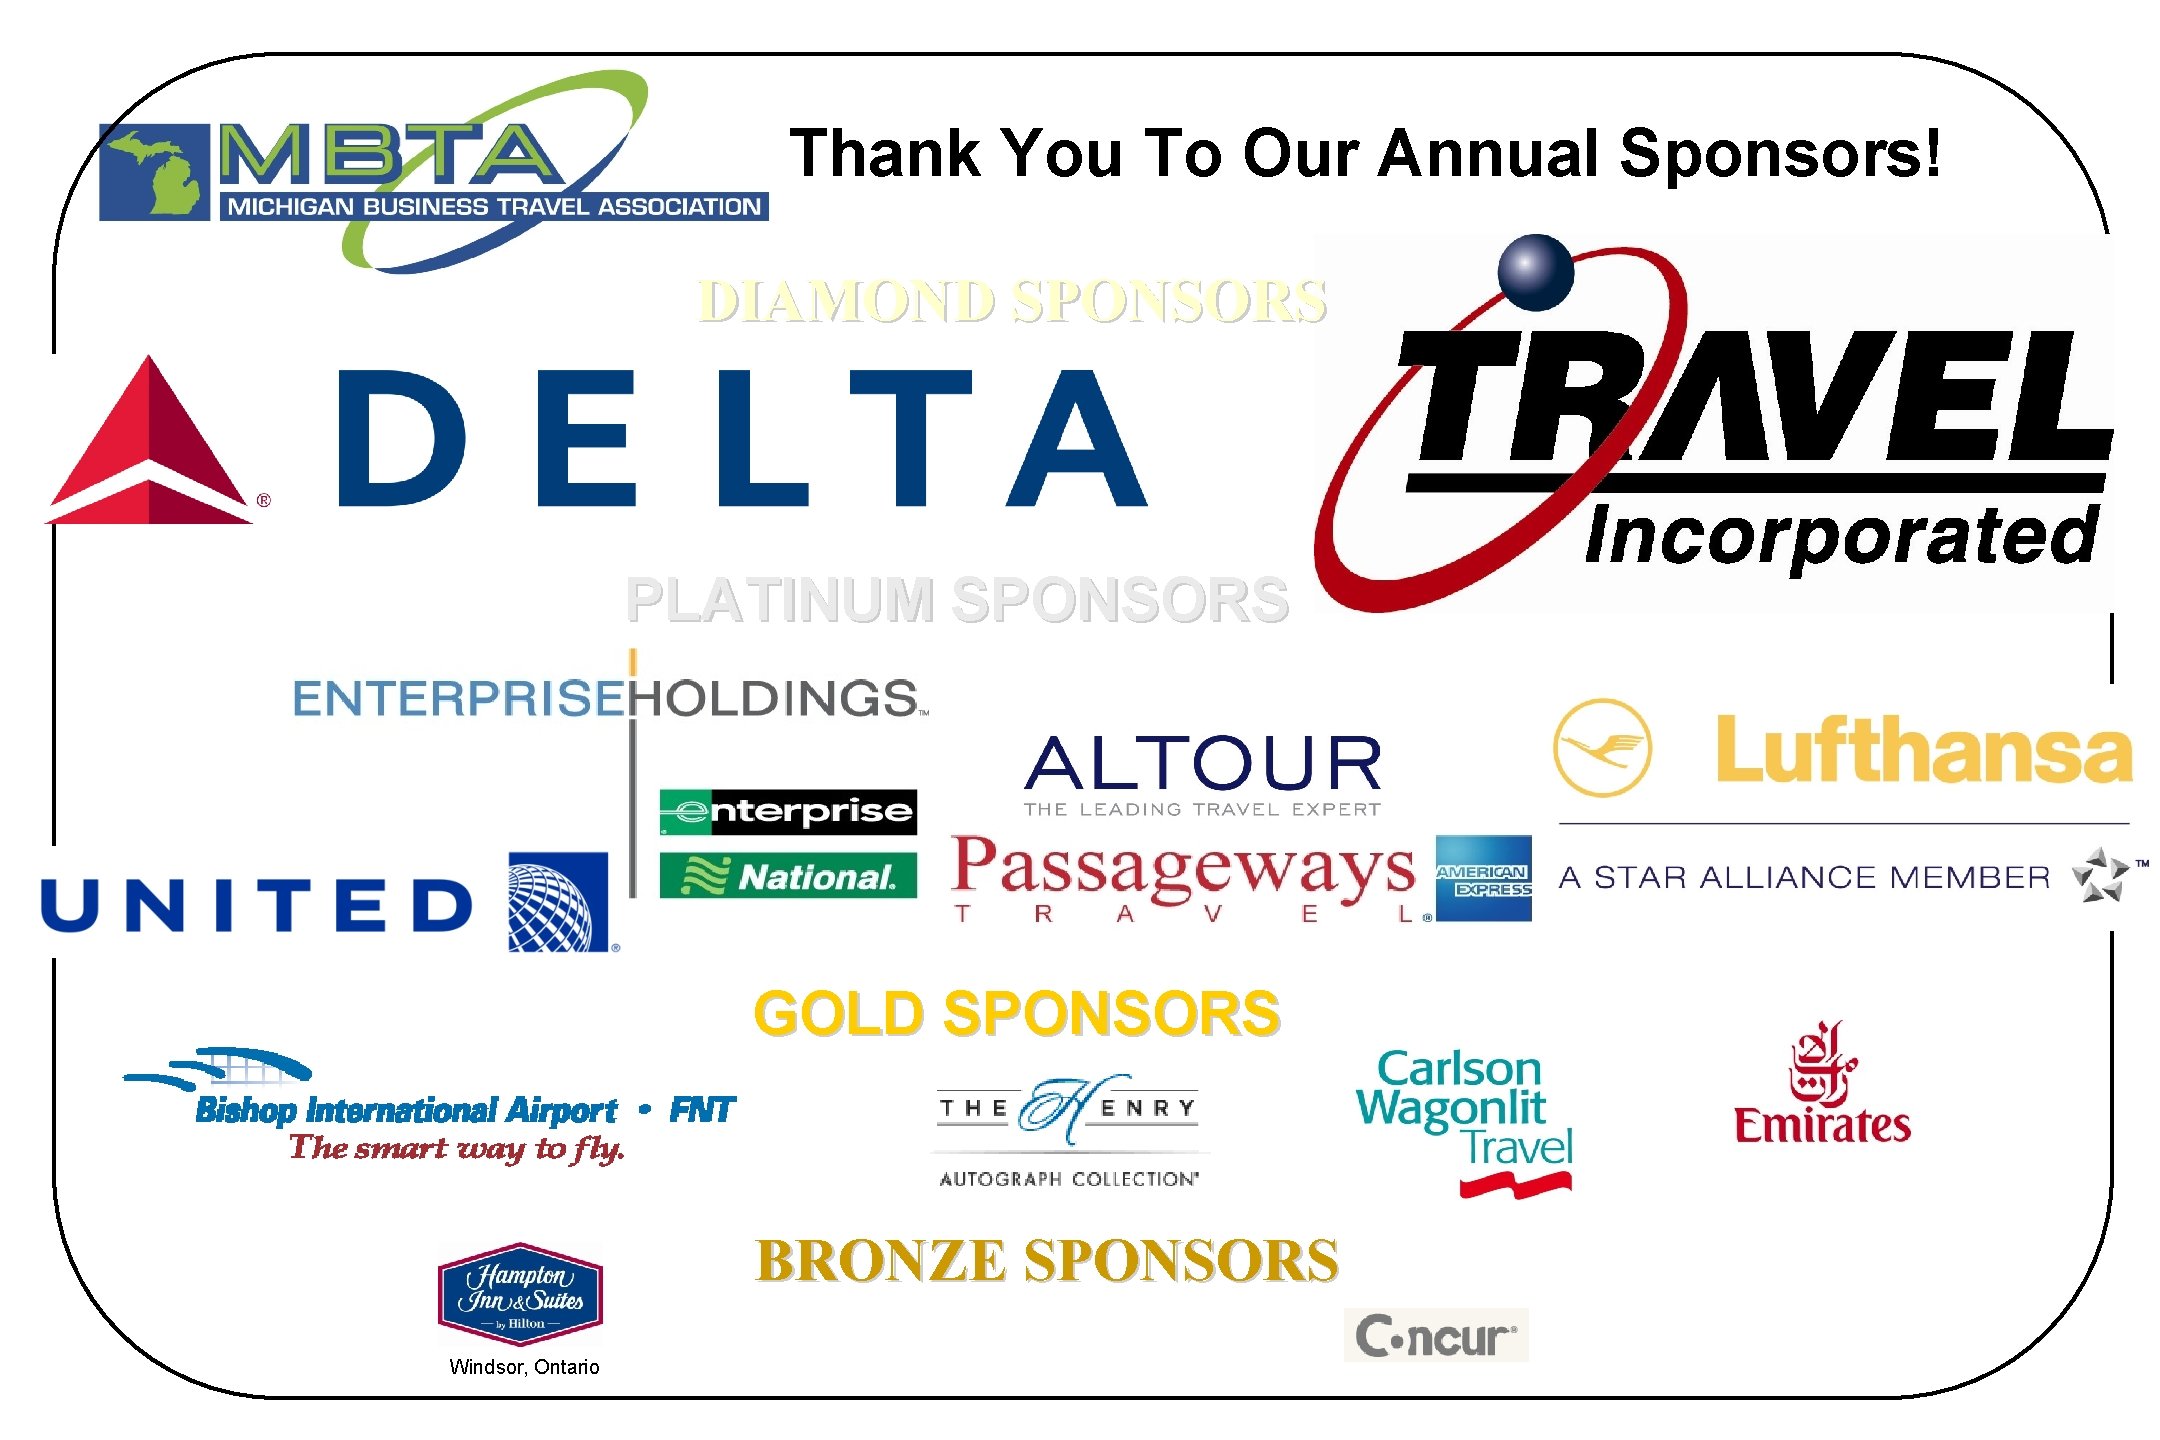 Thank You To Our Annual Sponsors! DIAMOND SPONSORS PLATINUM SPONSORS GOLD SPONSORS BRONZE SPONSORS